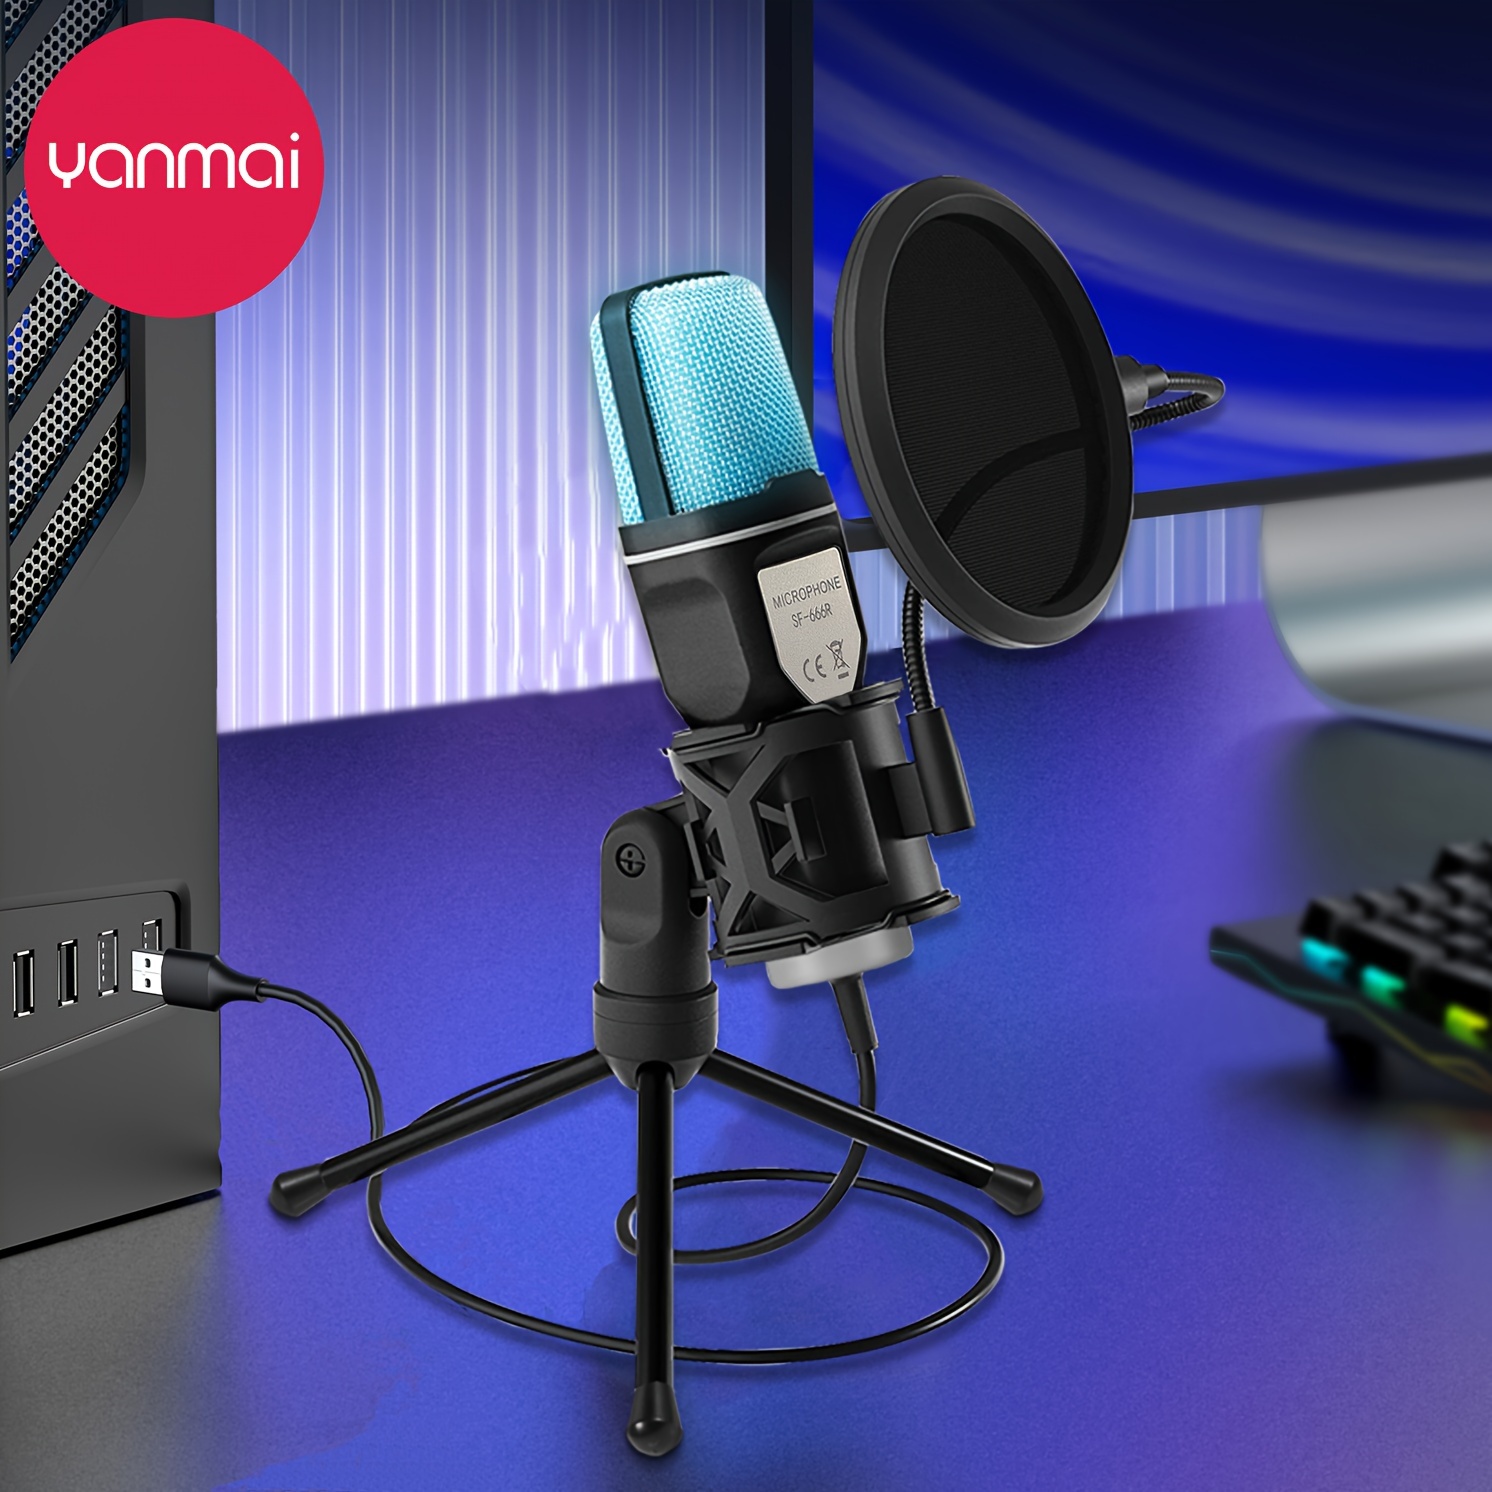 

Yanmai Sf-666r Rgb Usb Microphone For Recording And Streaming On Pc And Streaming, Podcasting, Voice Recording Filters, Compatible With Laptop Desktop Windows Pc Microphone